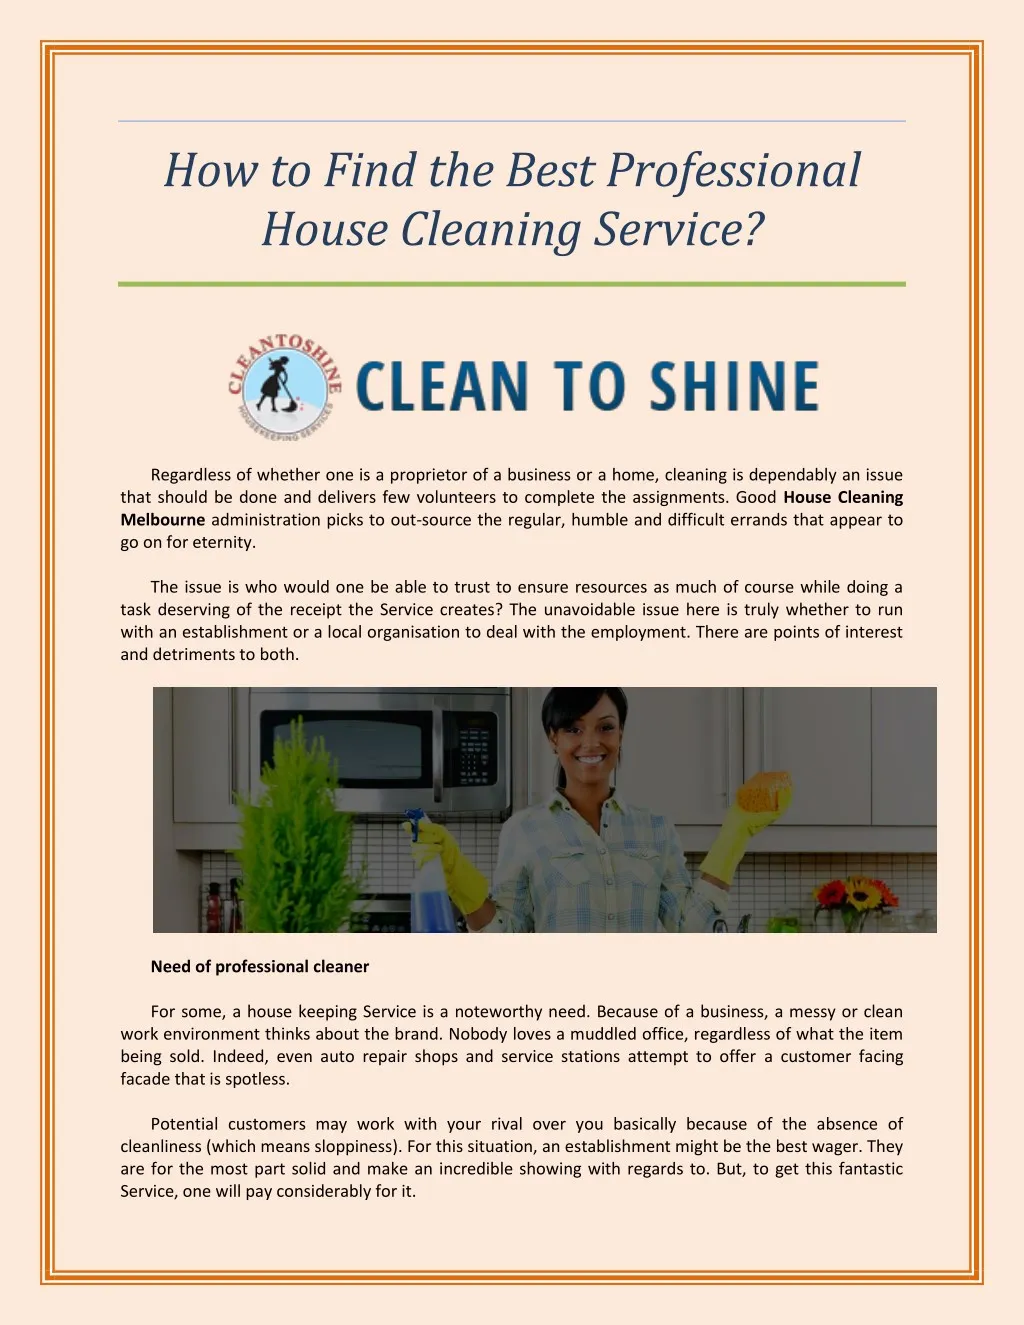 how to find the best professional house cleaning